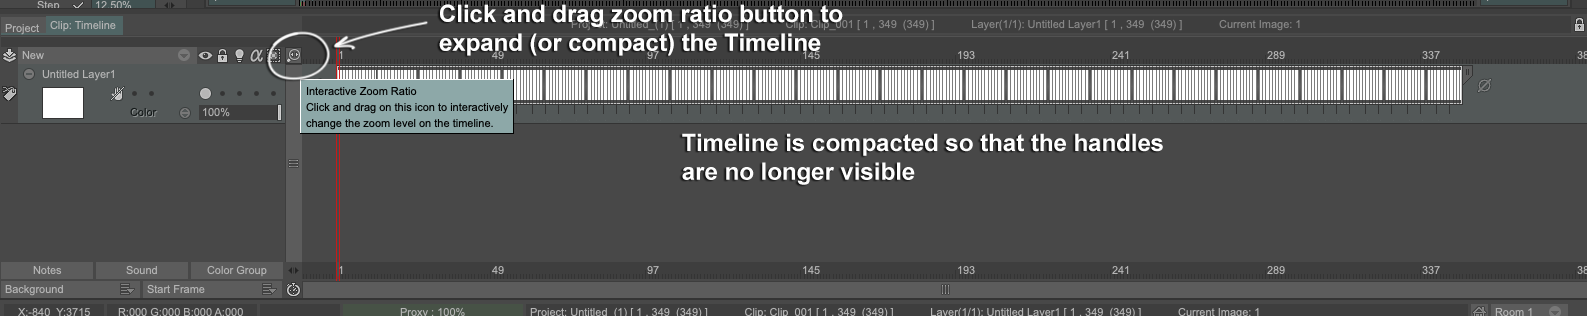 click and drag zoom ratio button on Timeline.png